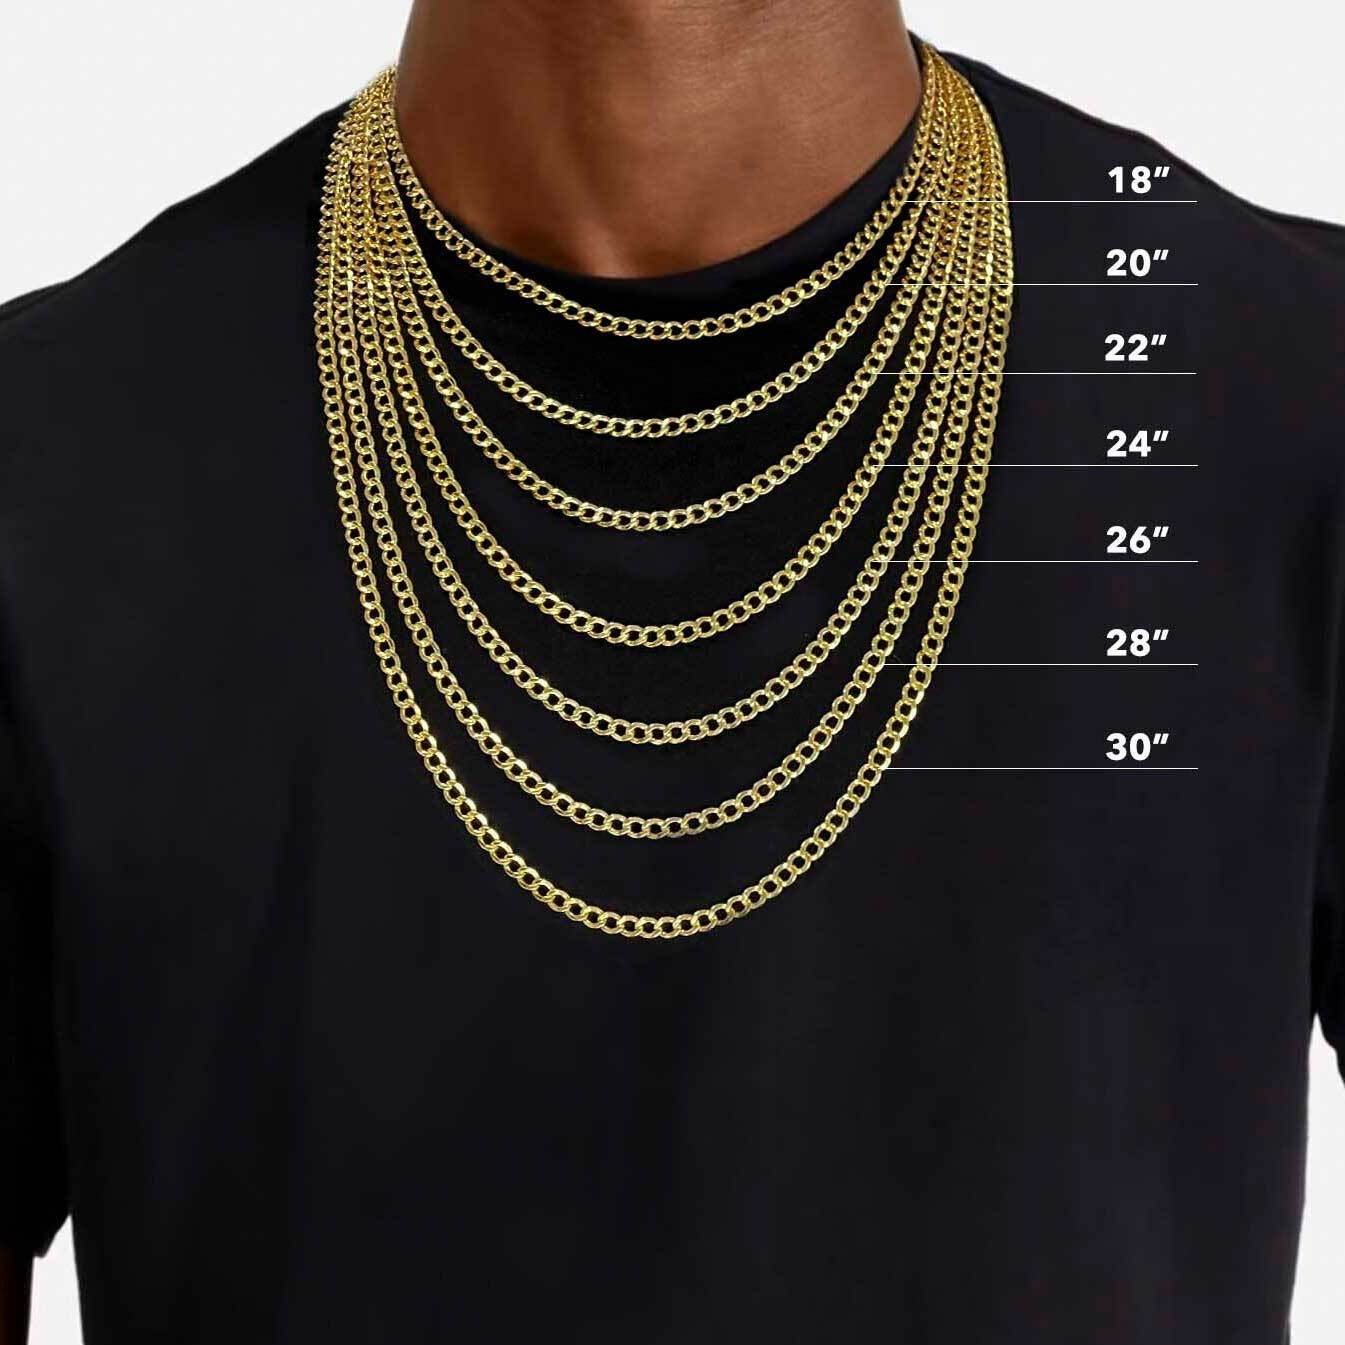 Rope Chain Necklace 10K Yellow Gold - Solid